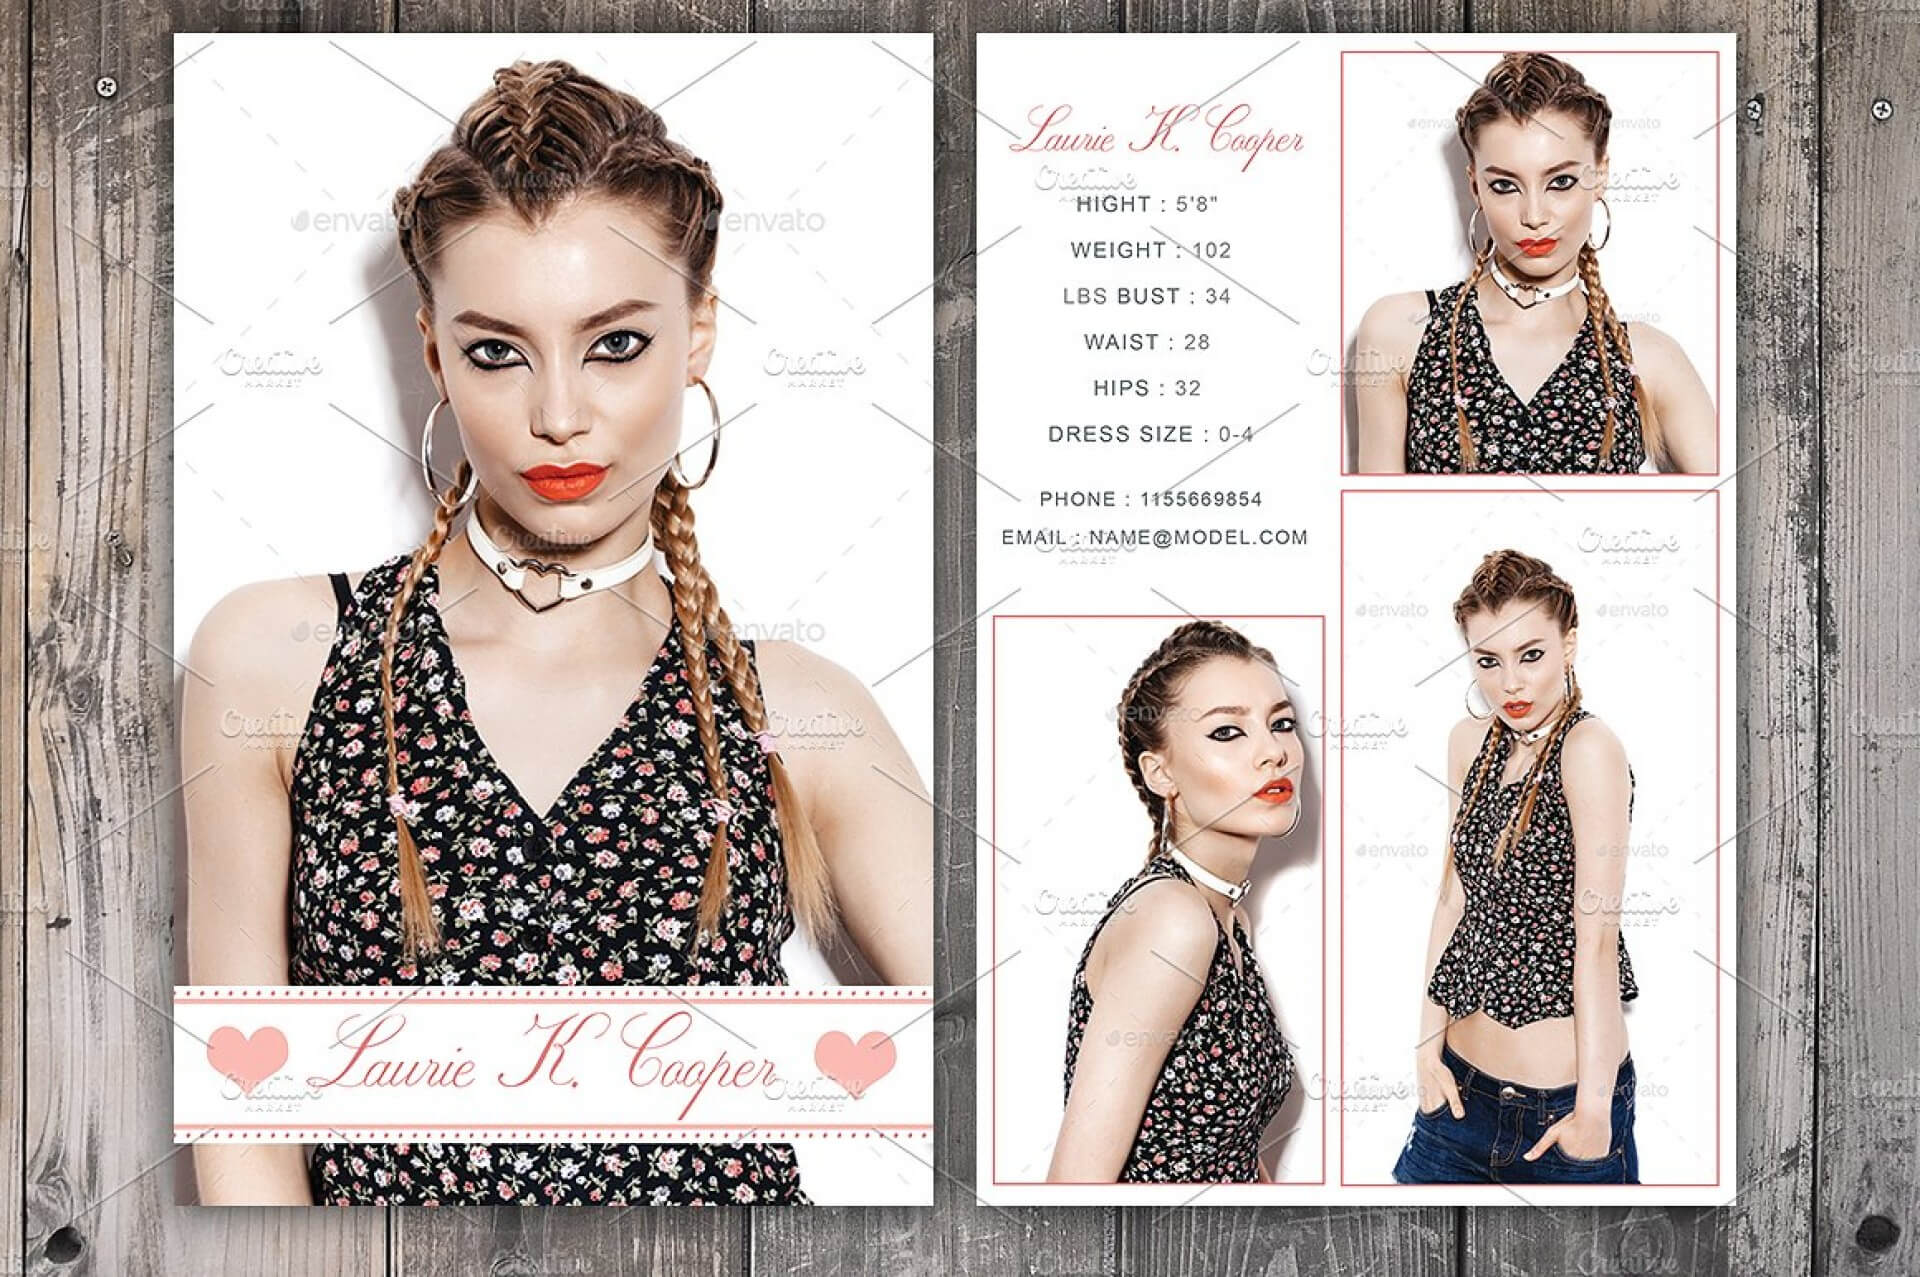 Free Comp Card Template Brochure Templates For Mac Photoshop With Comp Card Template Psd